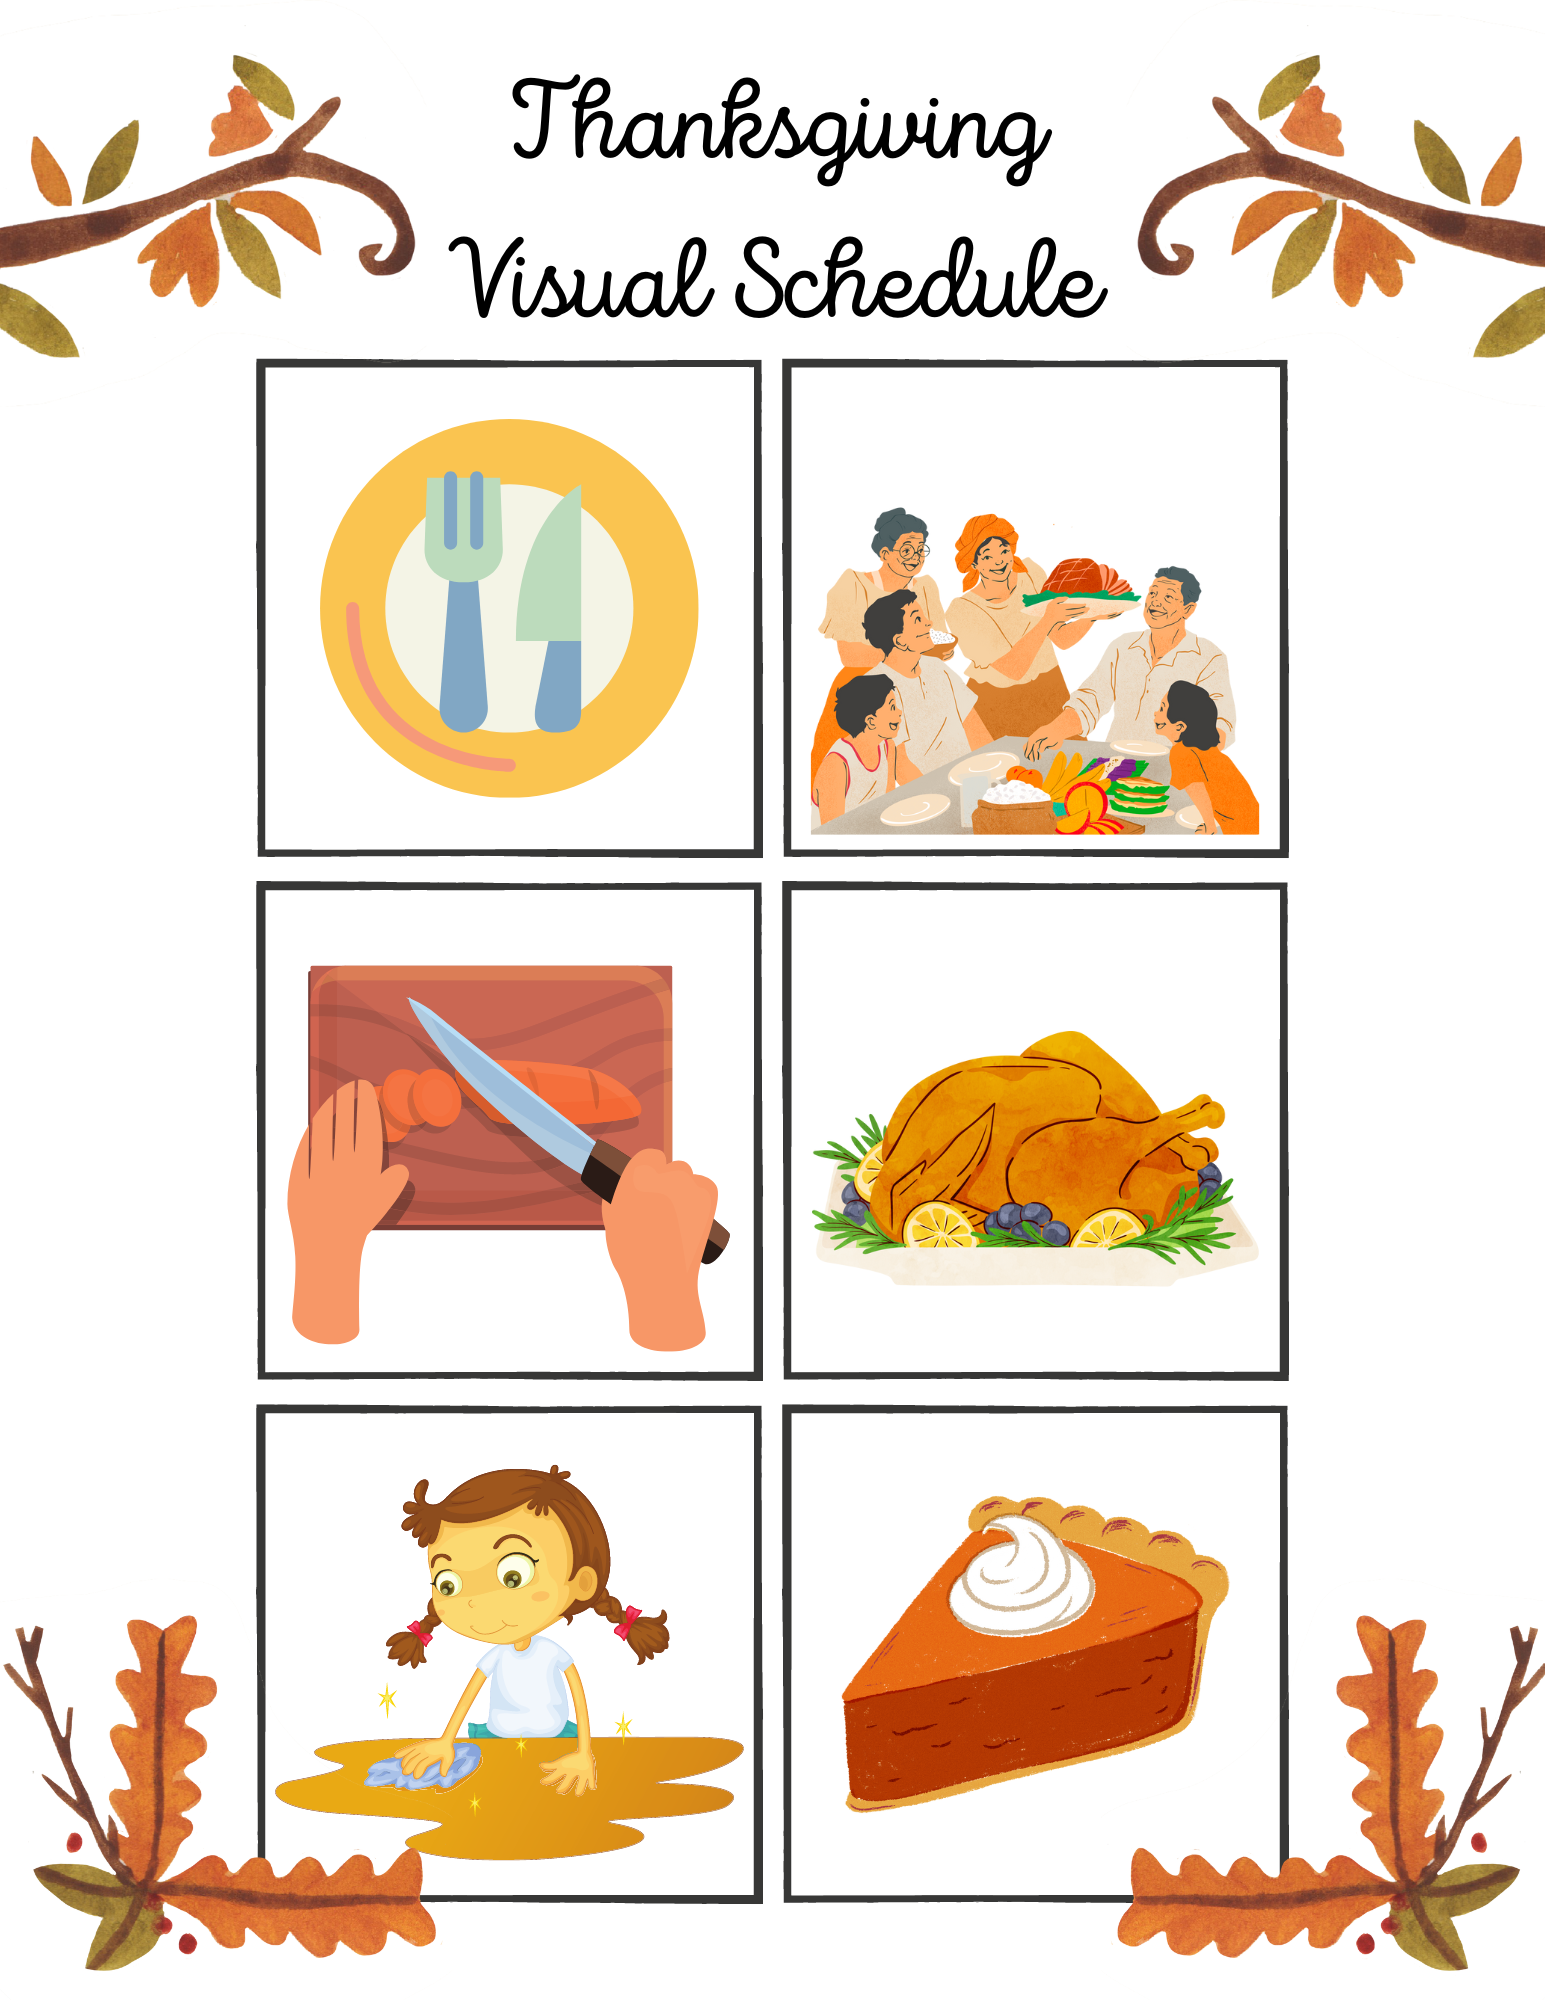 Visual Schedule with six thanksgiving day activities.